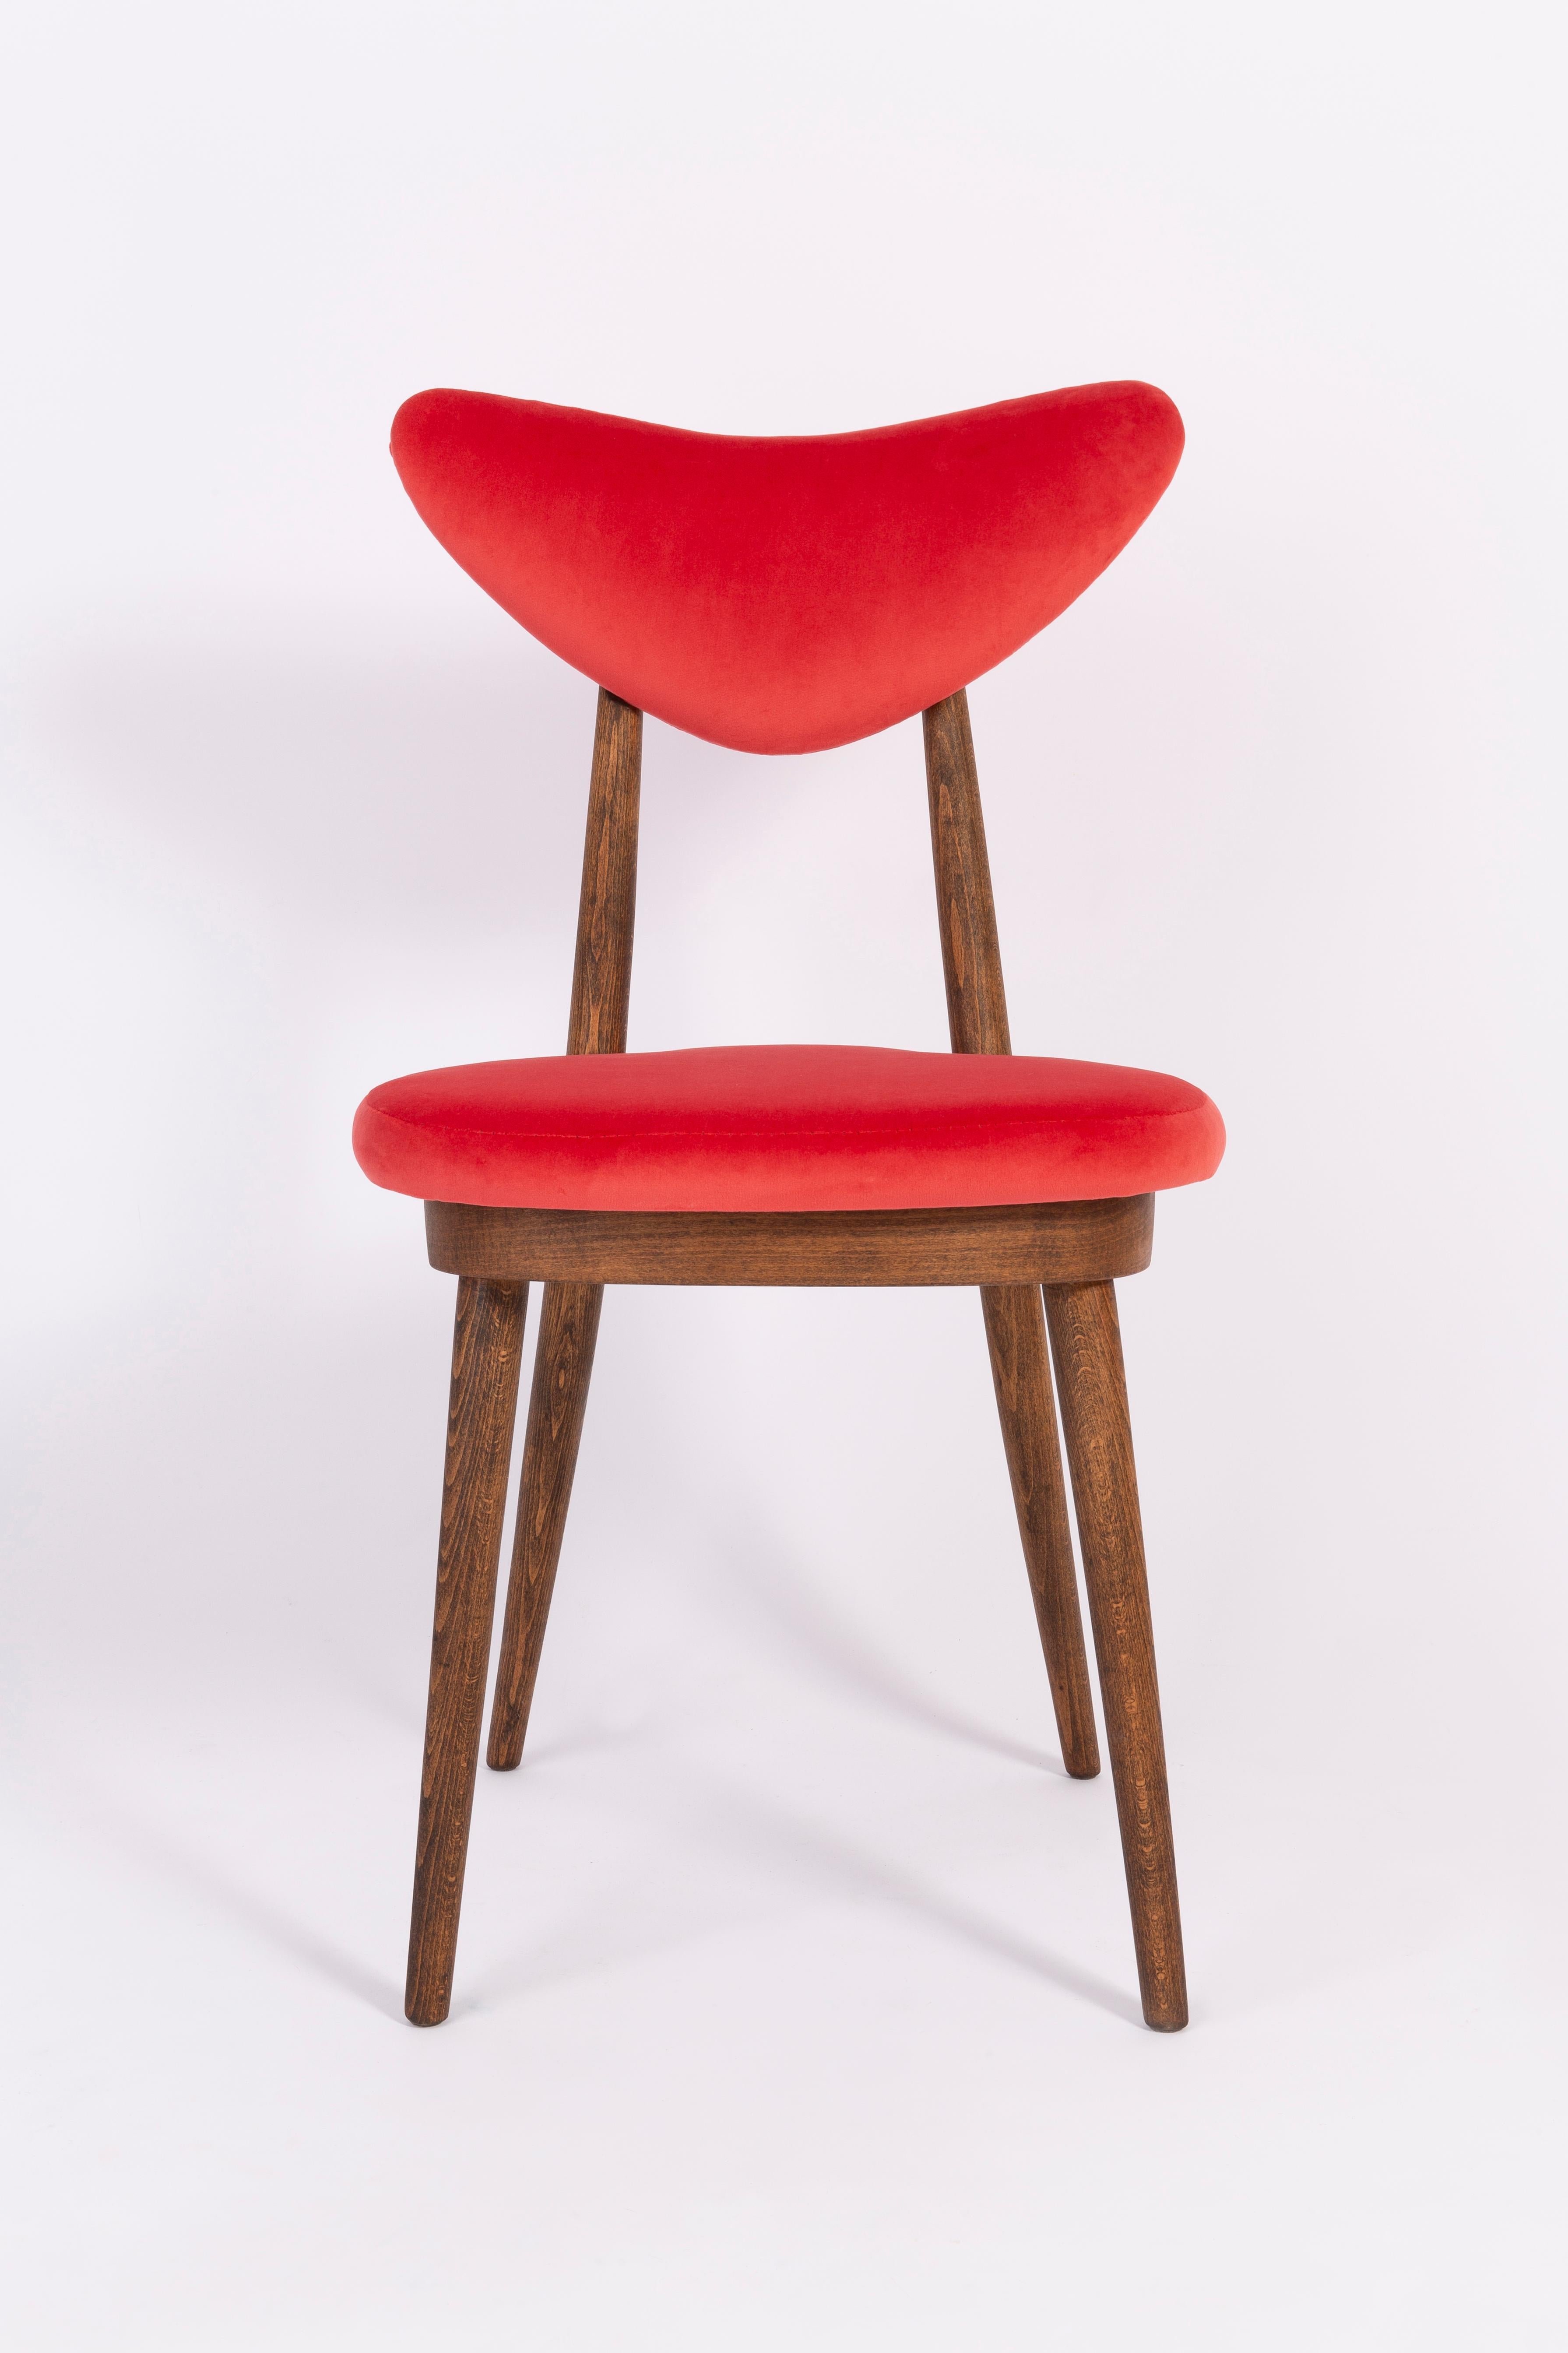 Set of Four Red Heart Chairs, Poland, 1960s For Sale 8